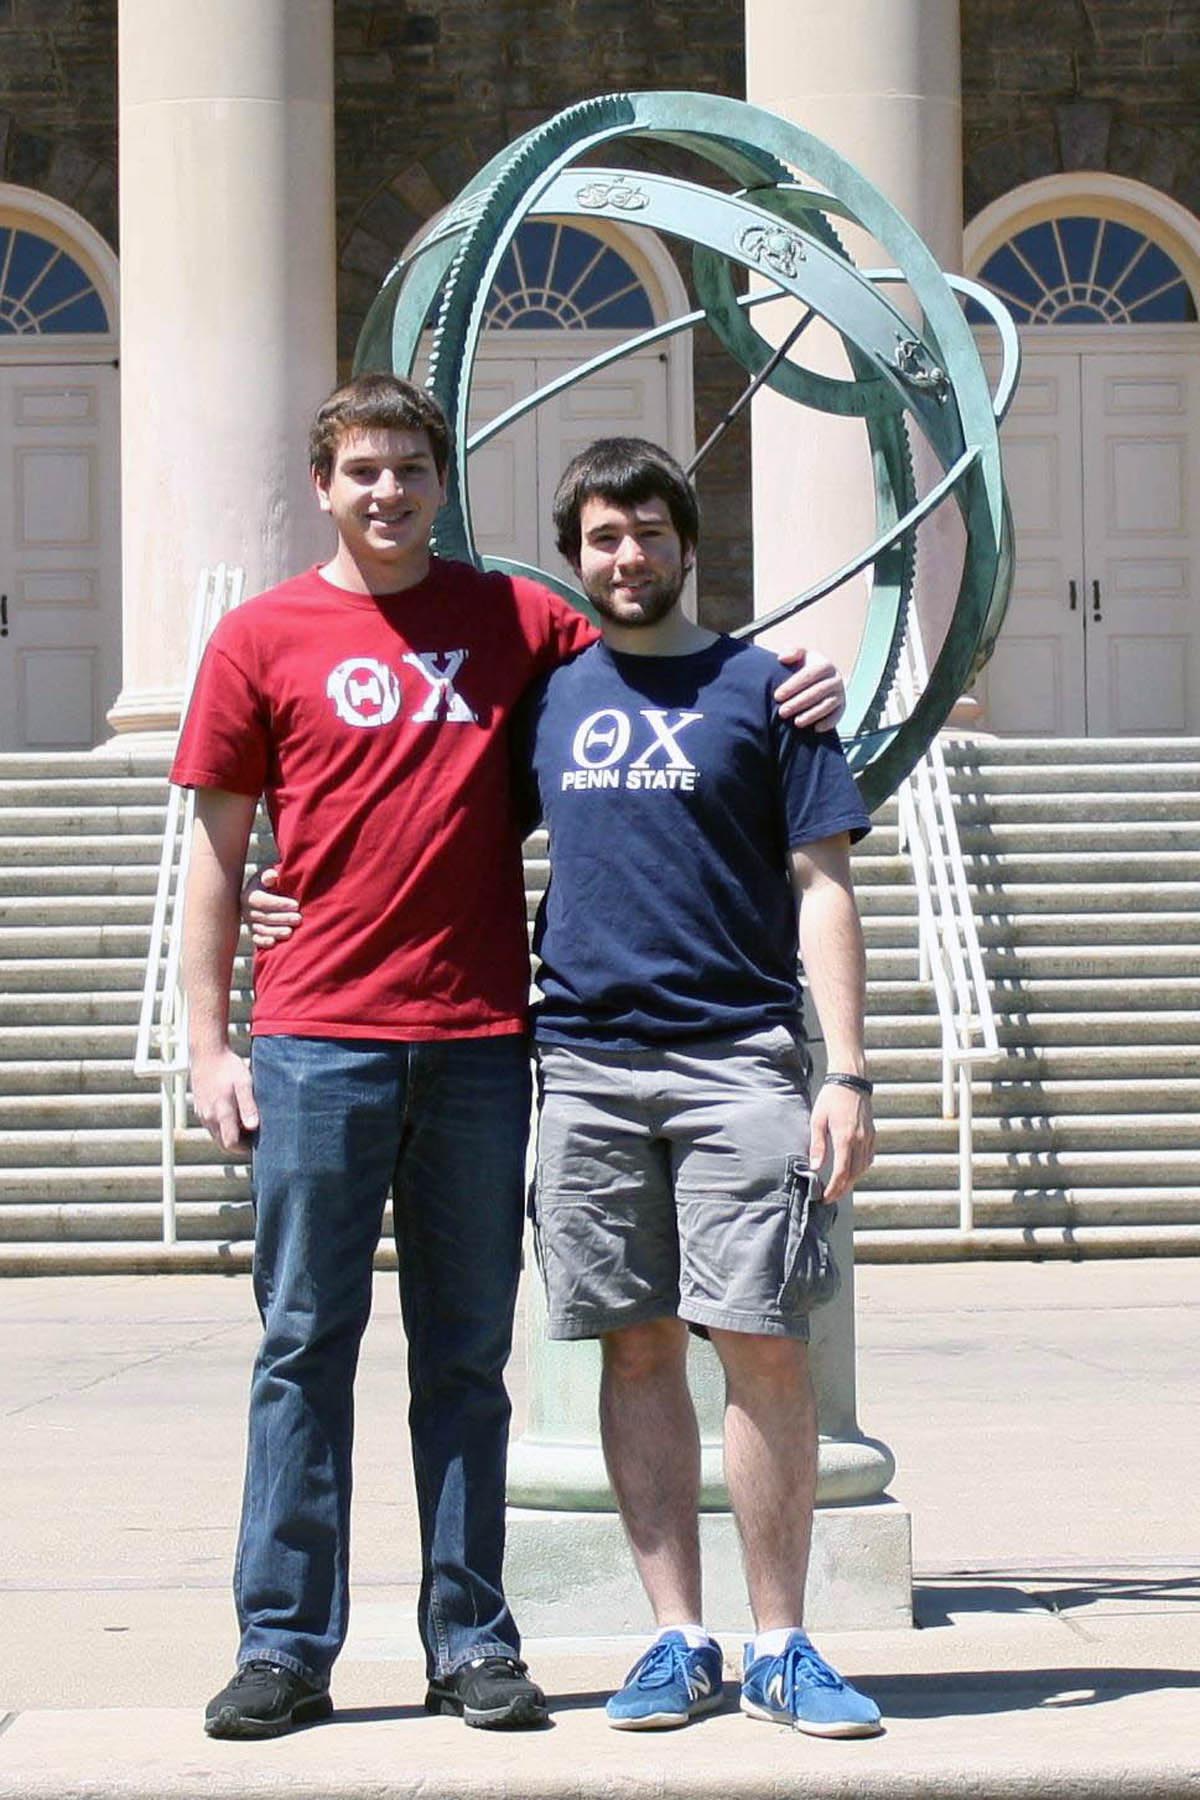  Kyle Sussman (L) and Peter Blasco
2012 End of Spring Semester 